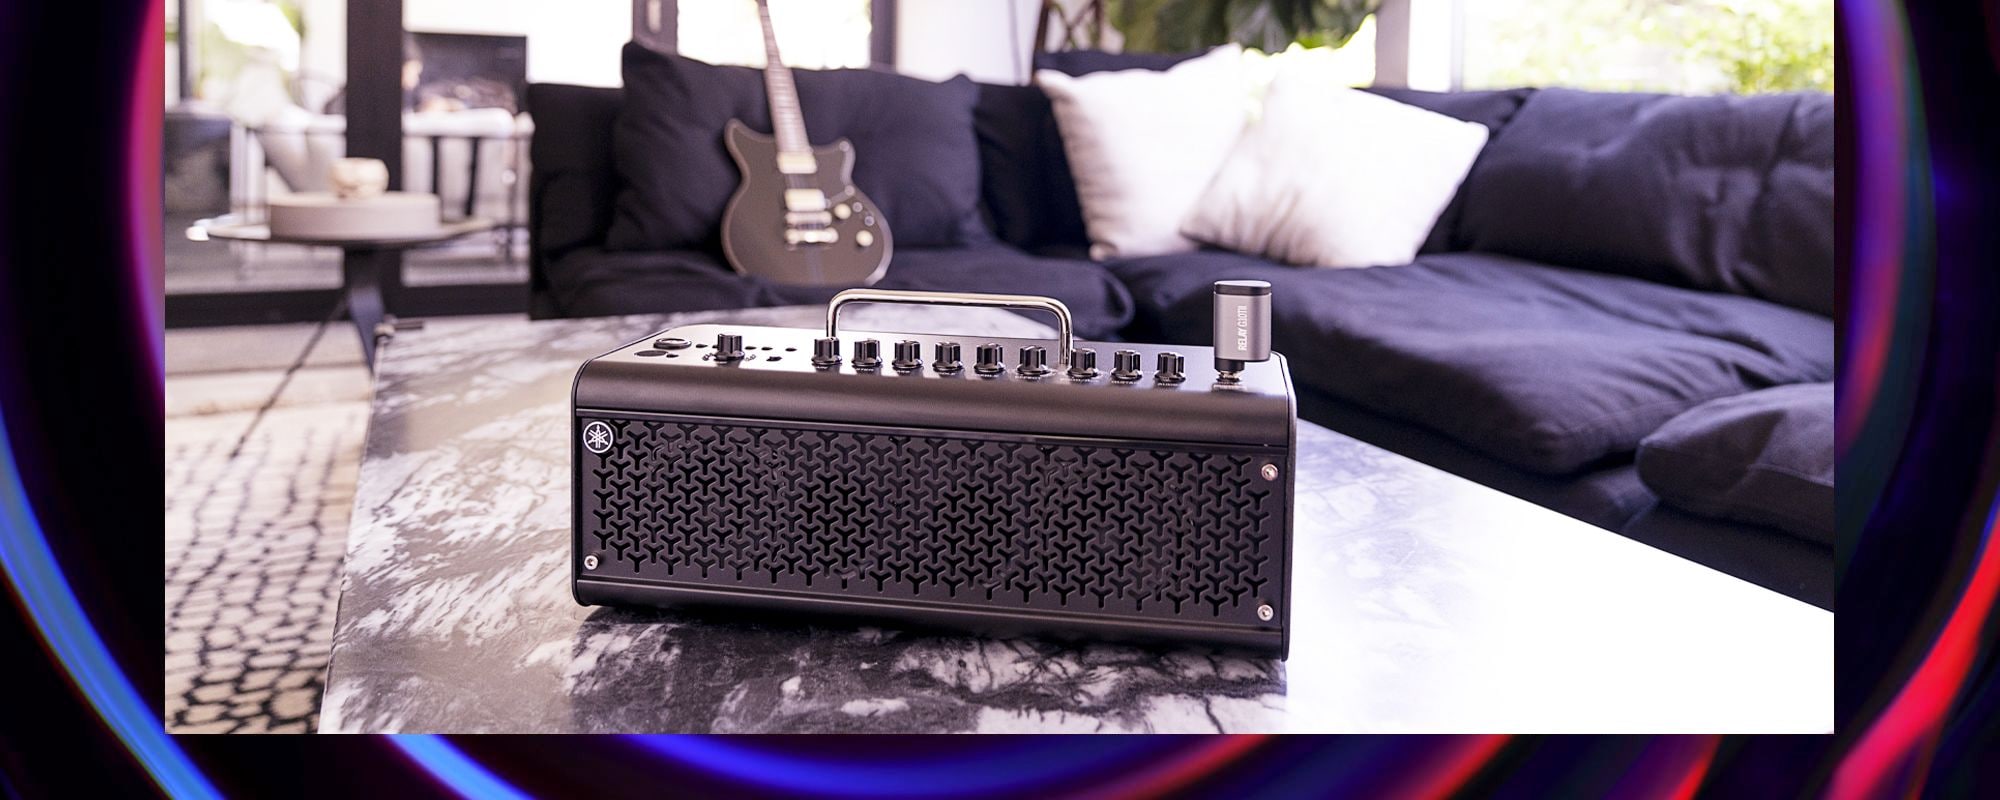 [Amps & Accessories]Visual image of THR30II Wireless black